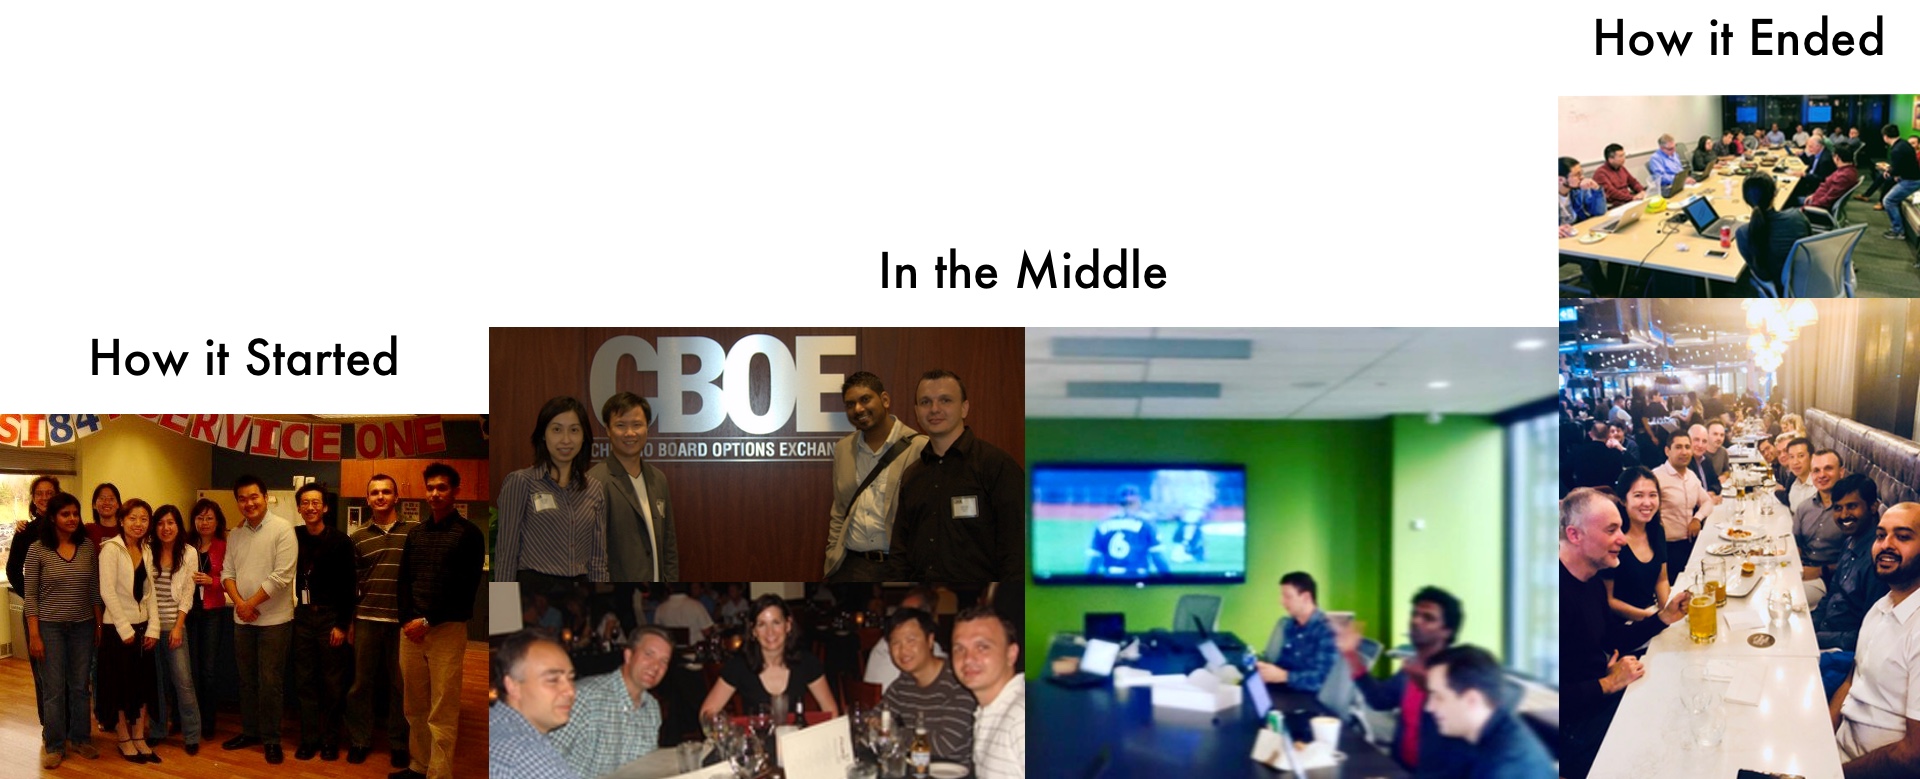 How it started: team picture. In the middle: cboe team picture. In the middle: team picture at office of blue jays baseball game. How in ended: team picture at going away dinner.
How it started: team picture from TD Direct Investing 2006. In the middle: thinkorswim team picture in front of CBOE sign. In the middle: team picture from WebBroker days watching the Blue Jays in the playoffs. How in ended: team picture in boardroom and going away dinner.